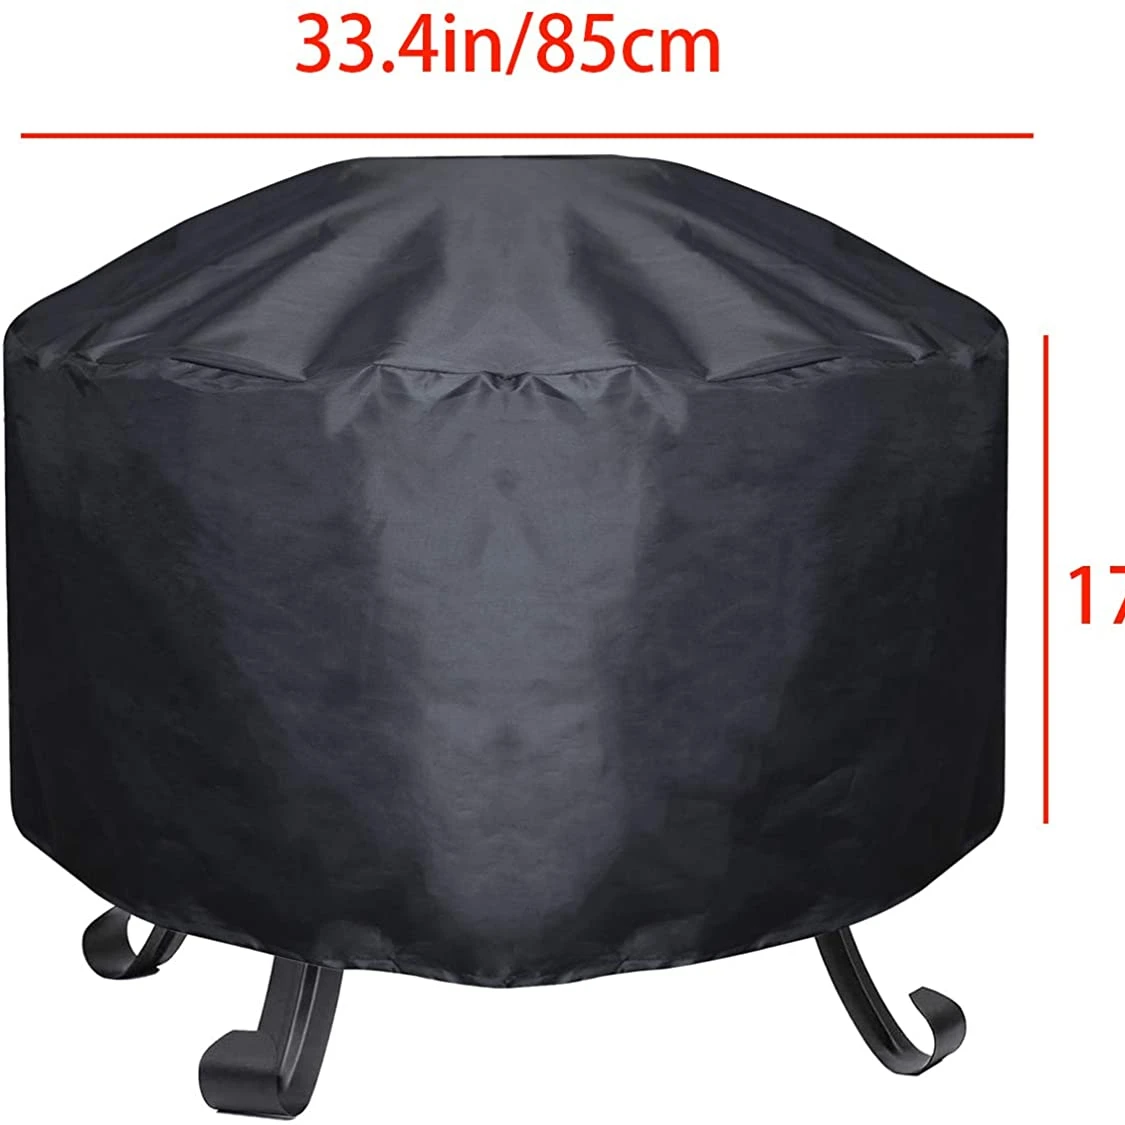 

Round Park Heater Durable Cover Patio Waterproof Fireplace Cover 210D Oxford Fabirc Backyard Firepit Bowl BBQ Gas Grill Protect, Black